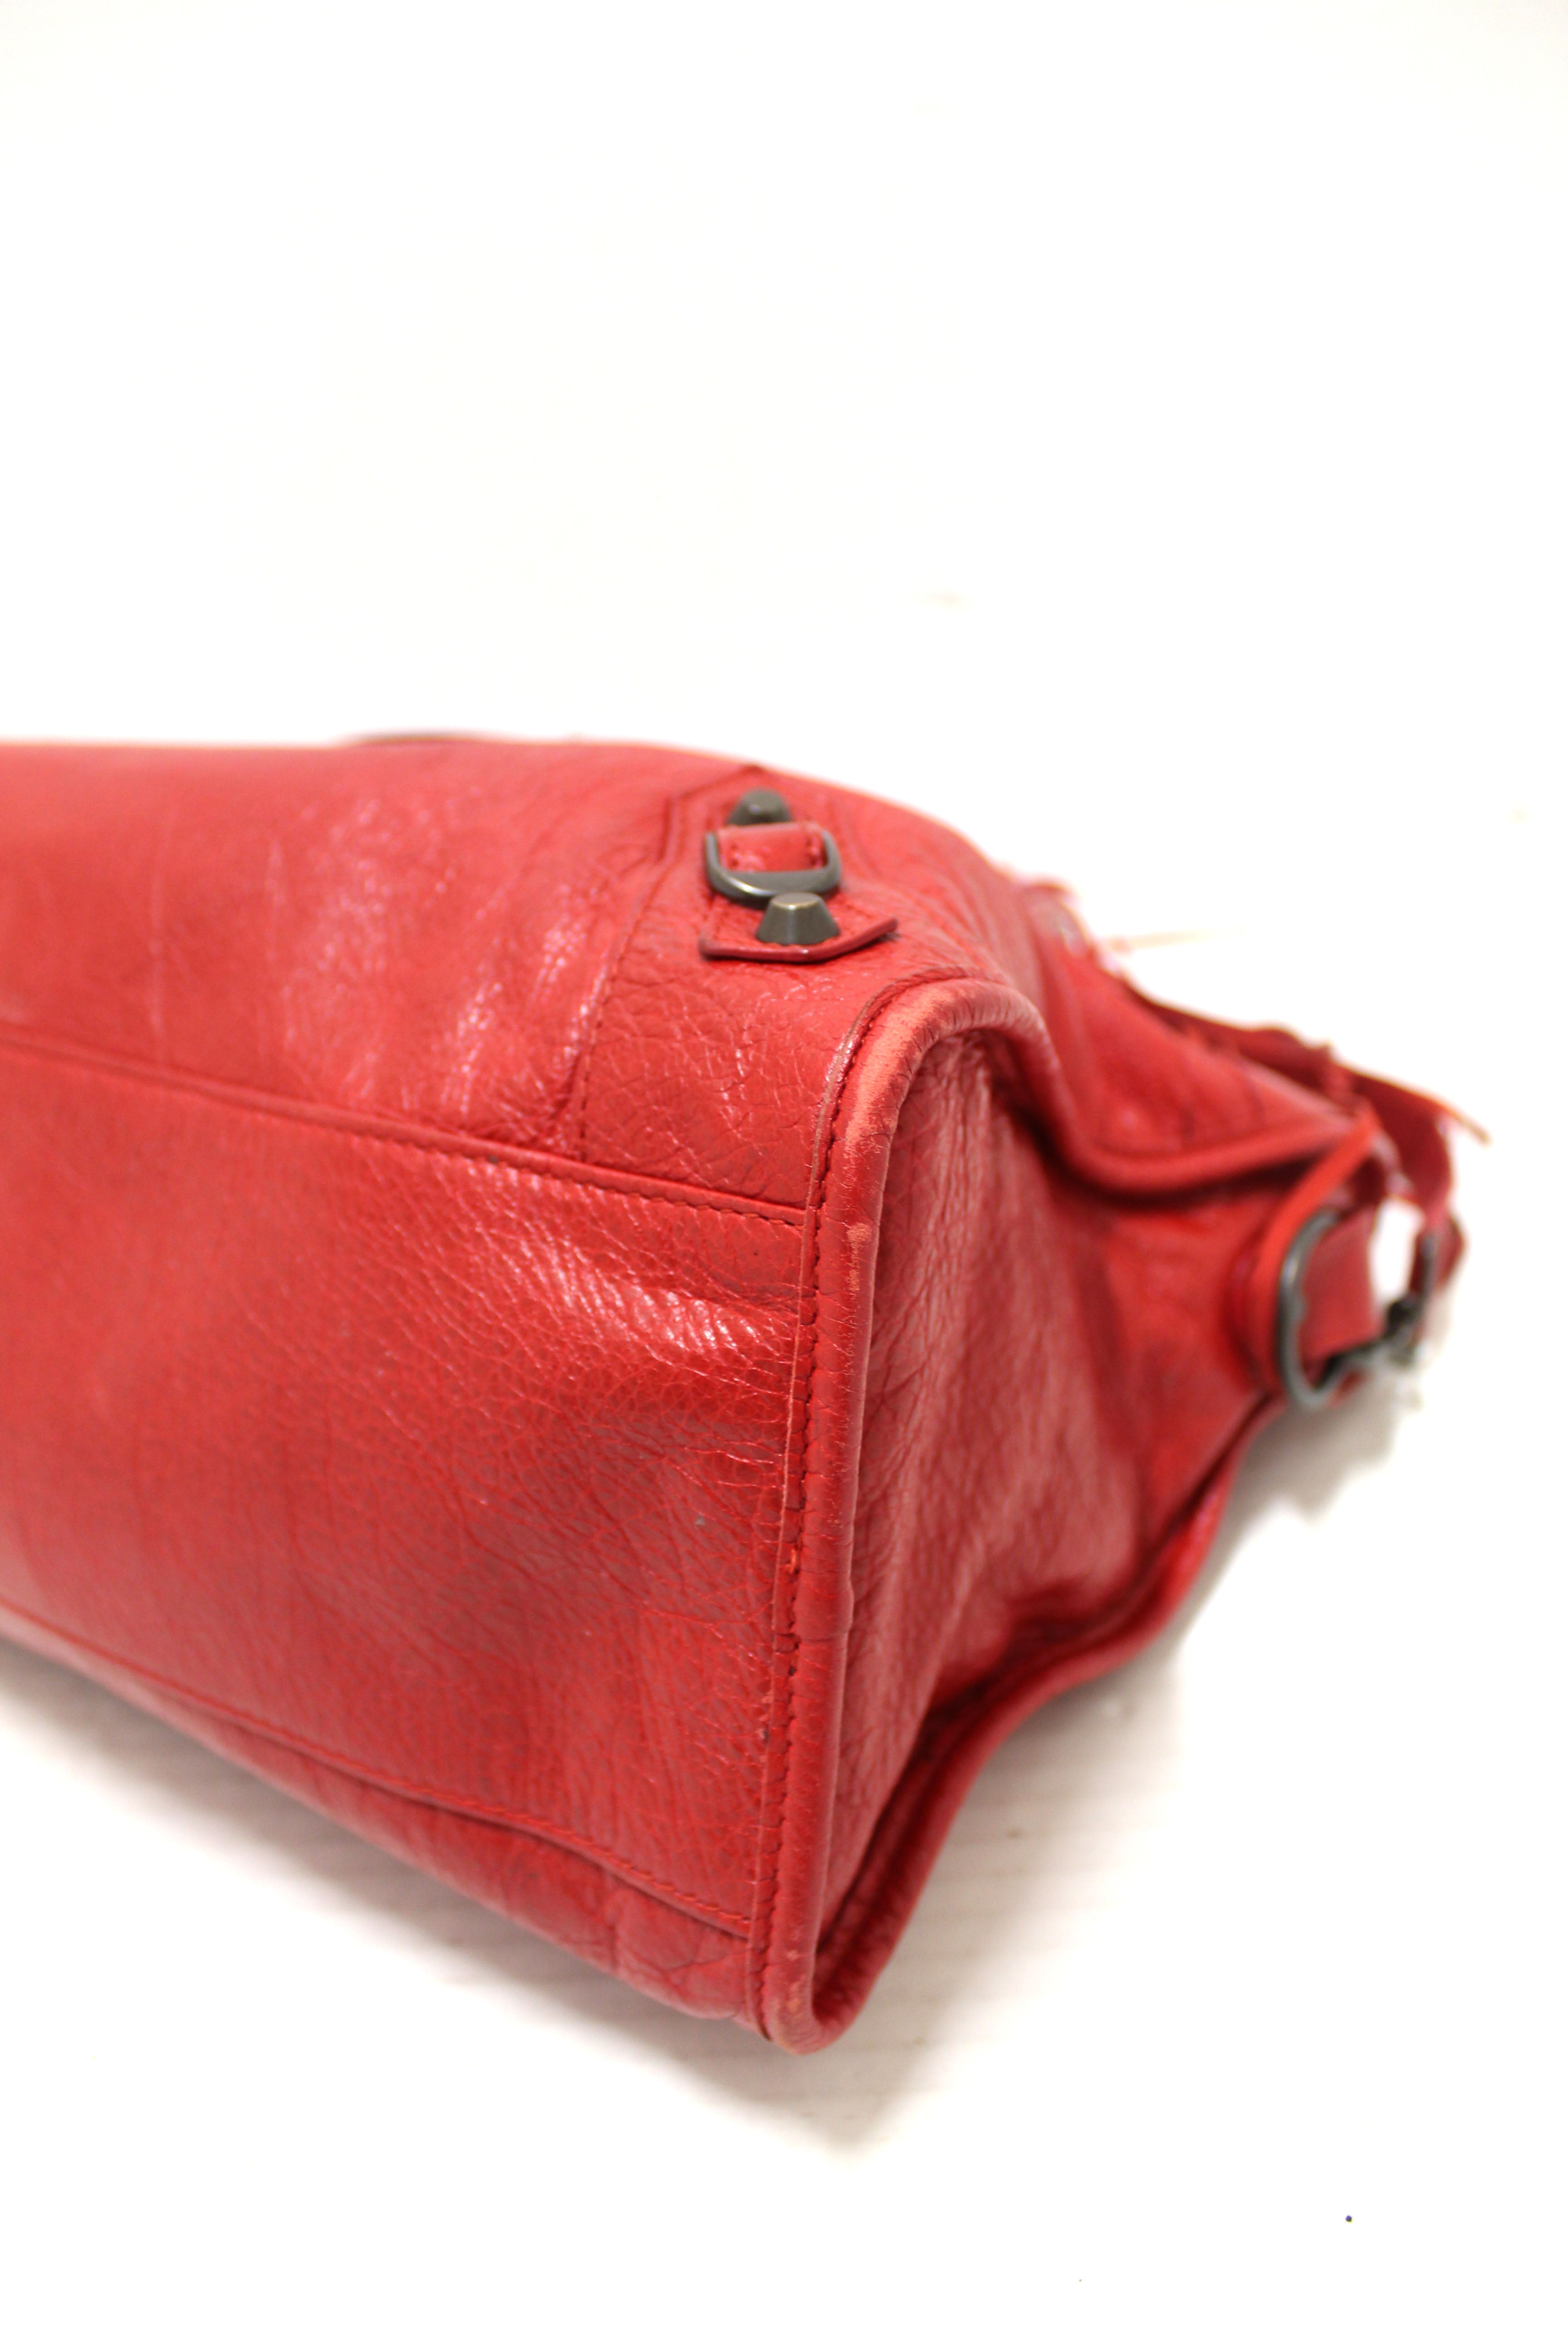 Authentic Balenciaga Red Classic City Lambskin Leather Shoulder Bag